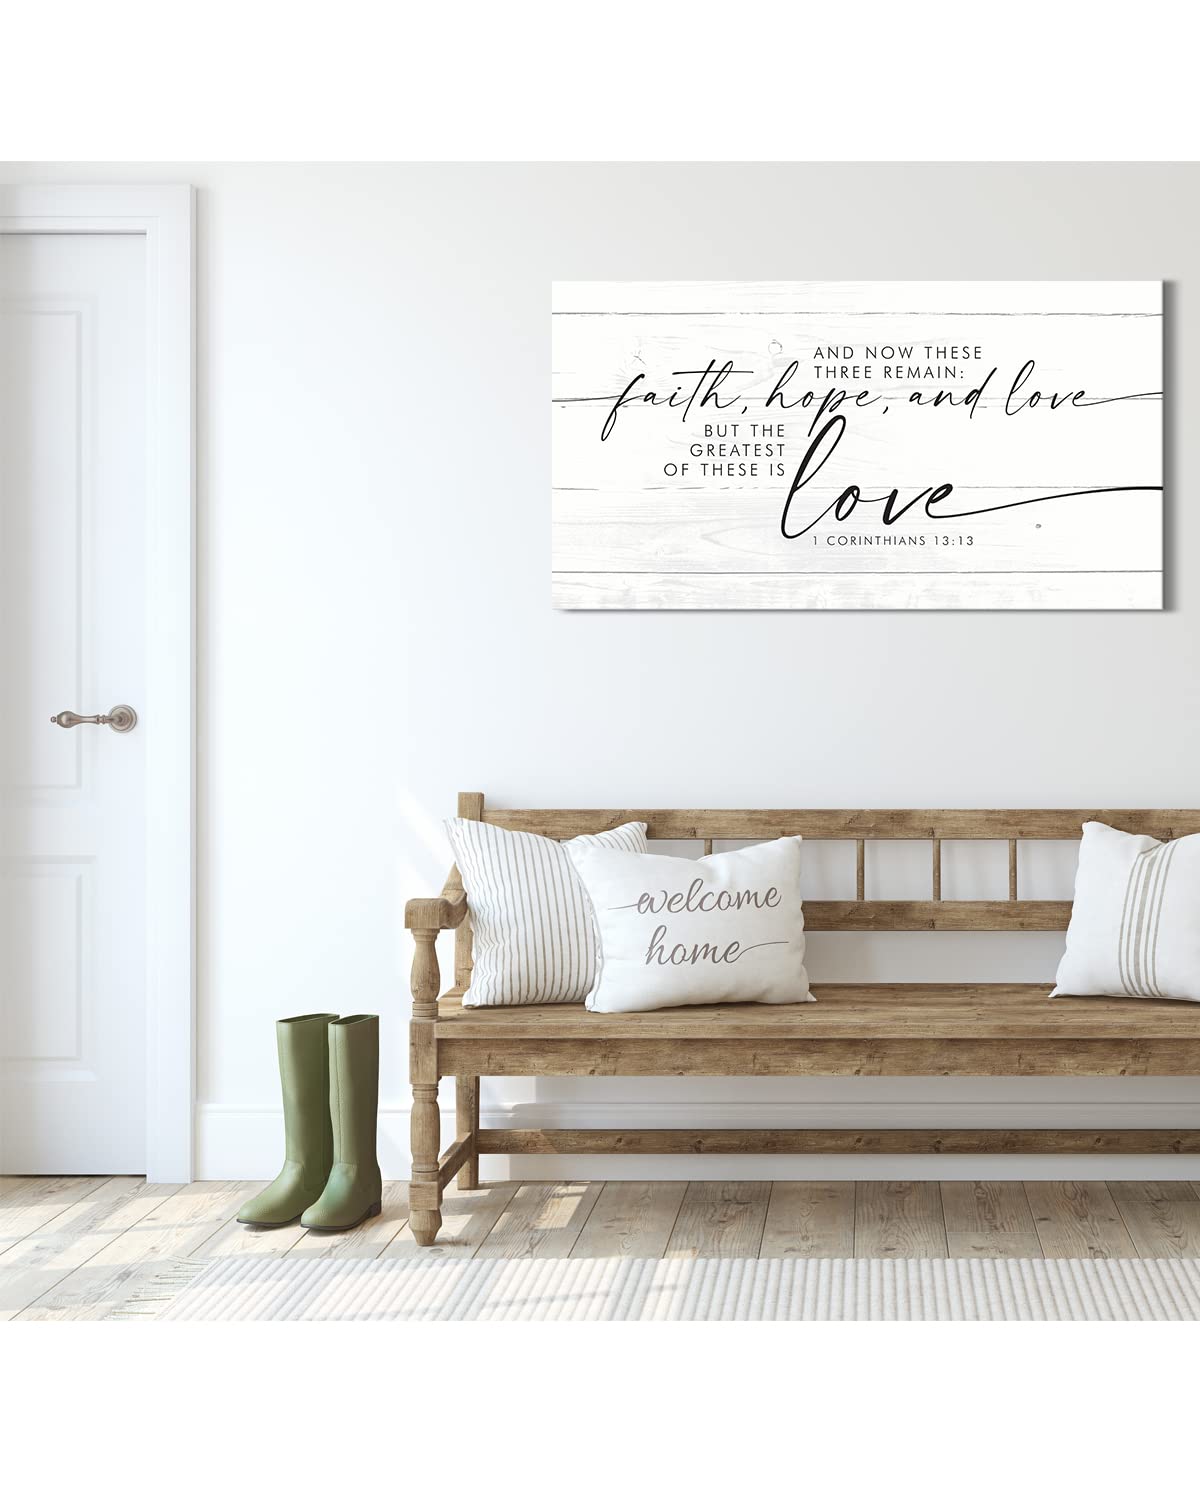 Bedroom Wall Decor Above Bed - And Now These Three Remain Room Decor - 1 Corinthians Sign - Bible Verses Wall Decor - Bridal Shower Wedding Gift For Couple